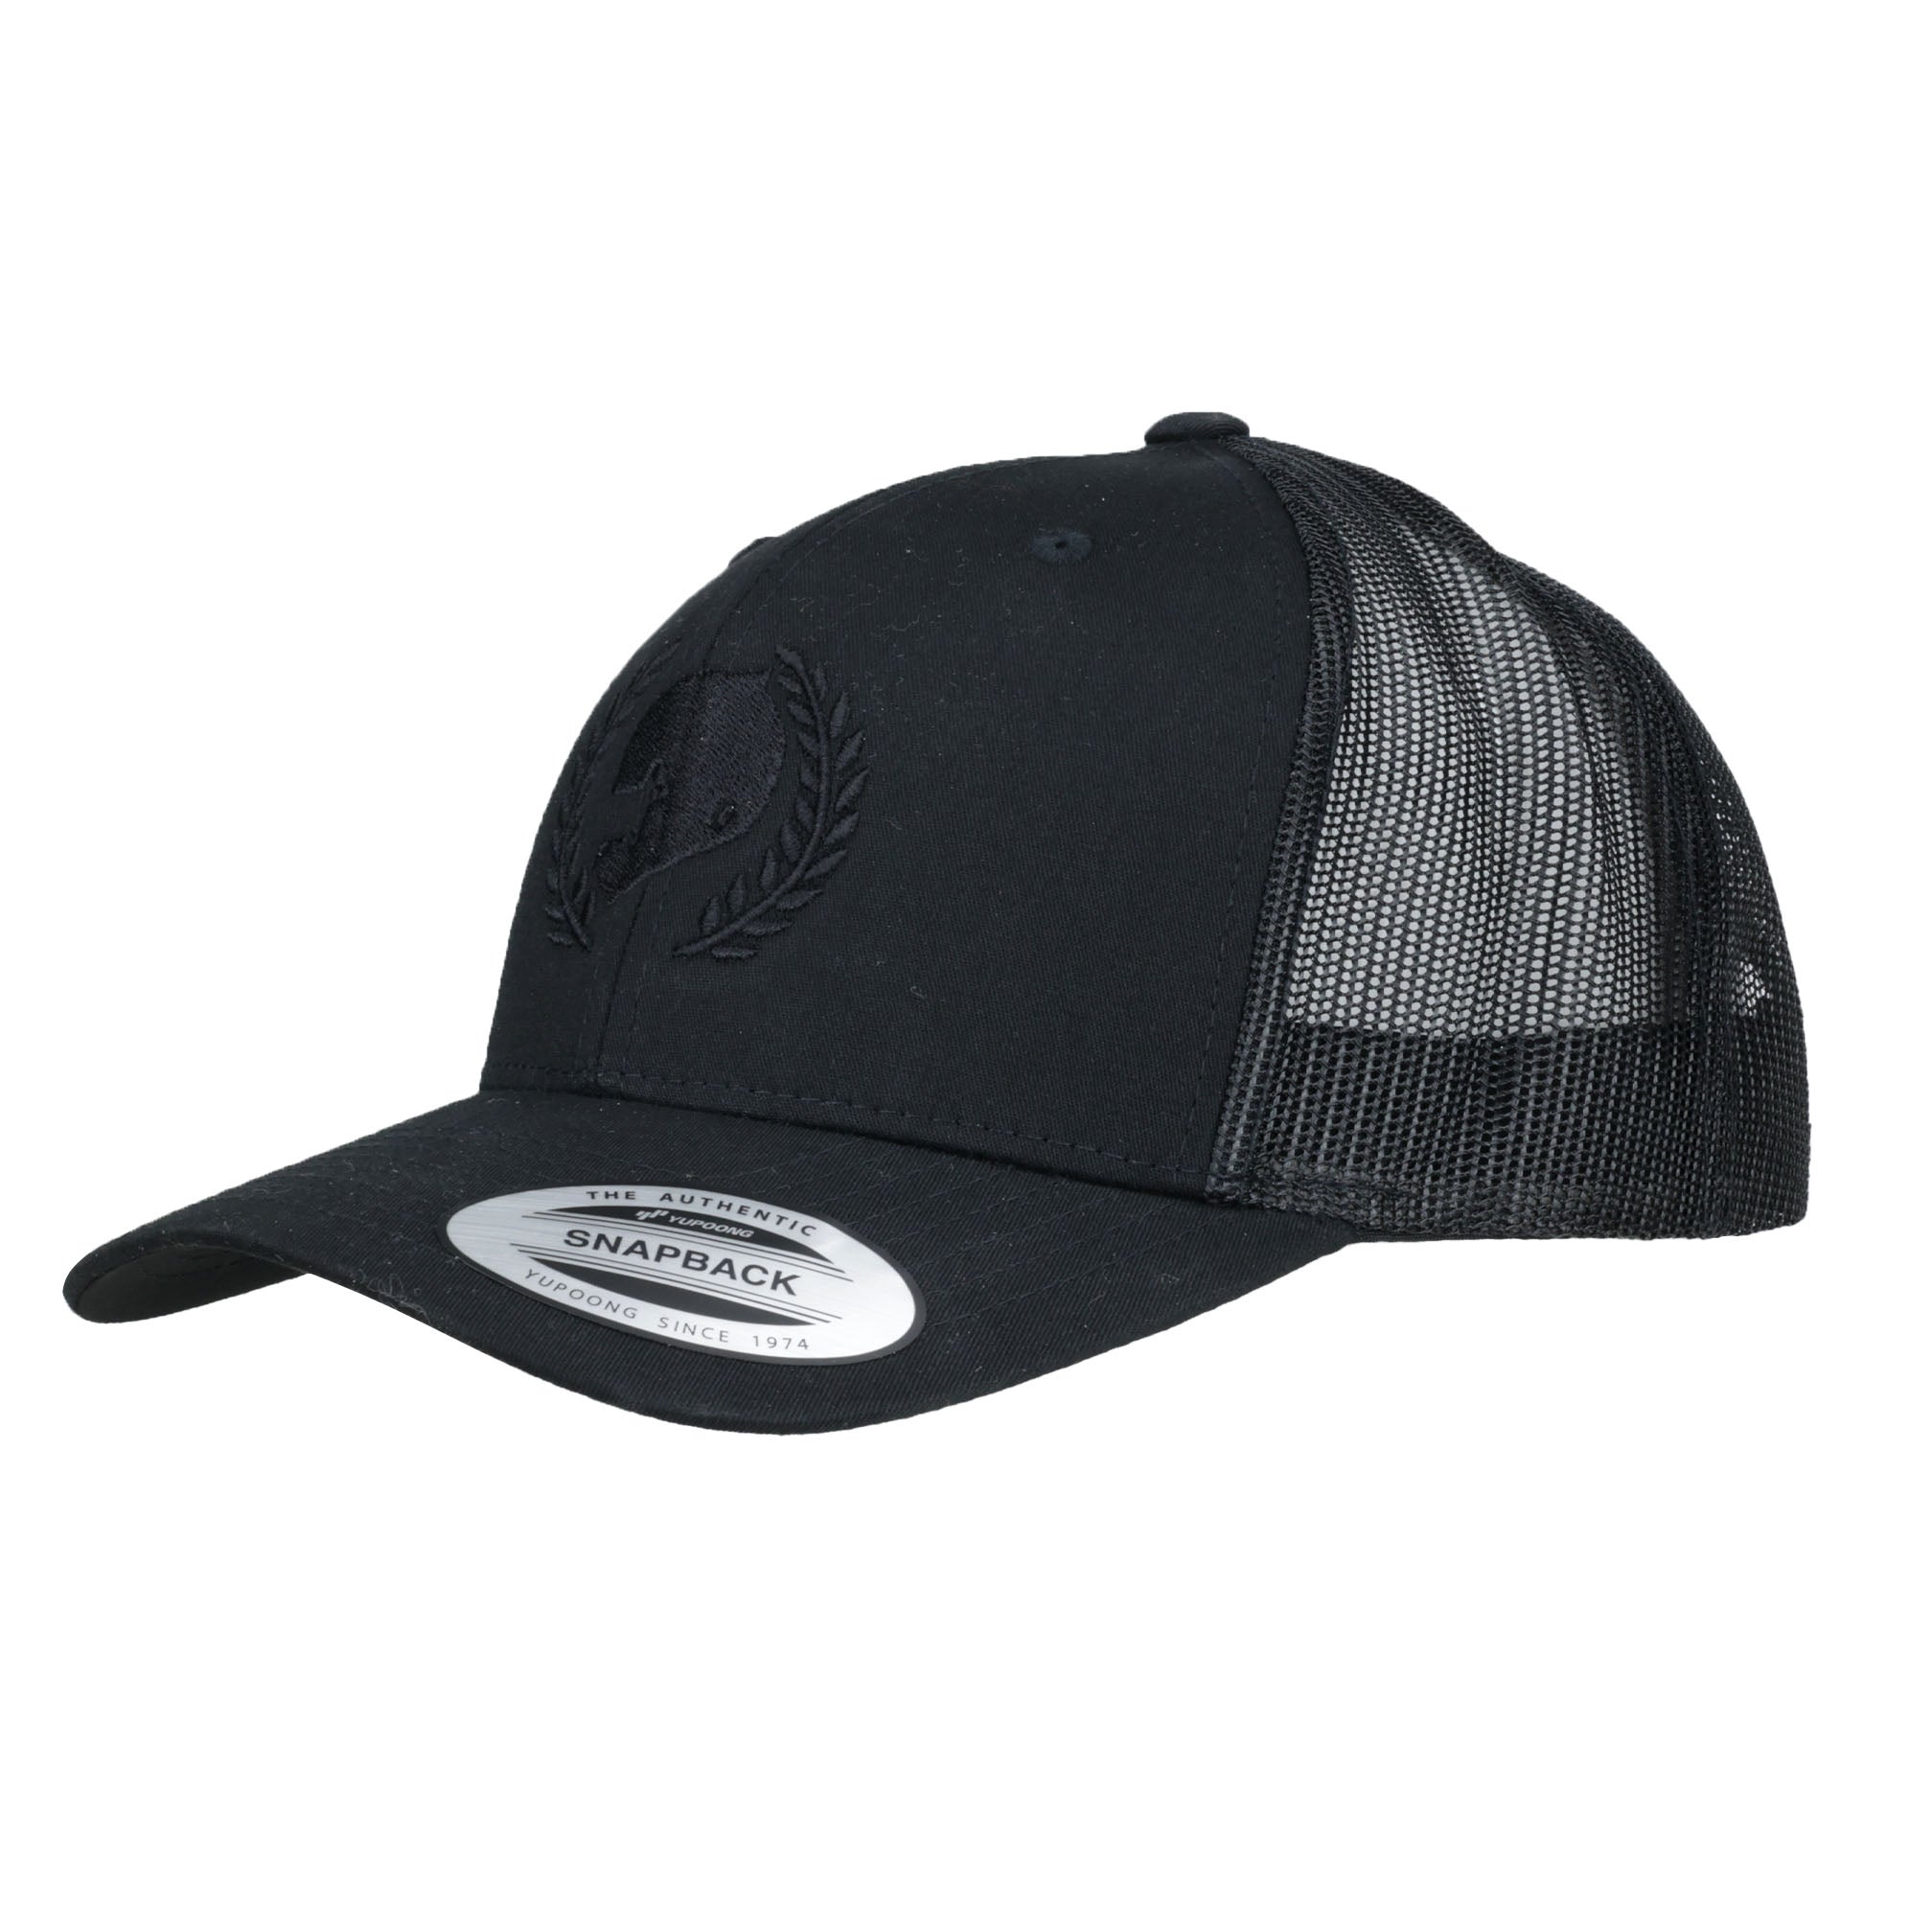 Official Hall of Fame Collection Limited Edition Black Hat